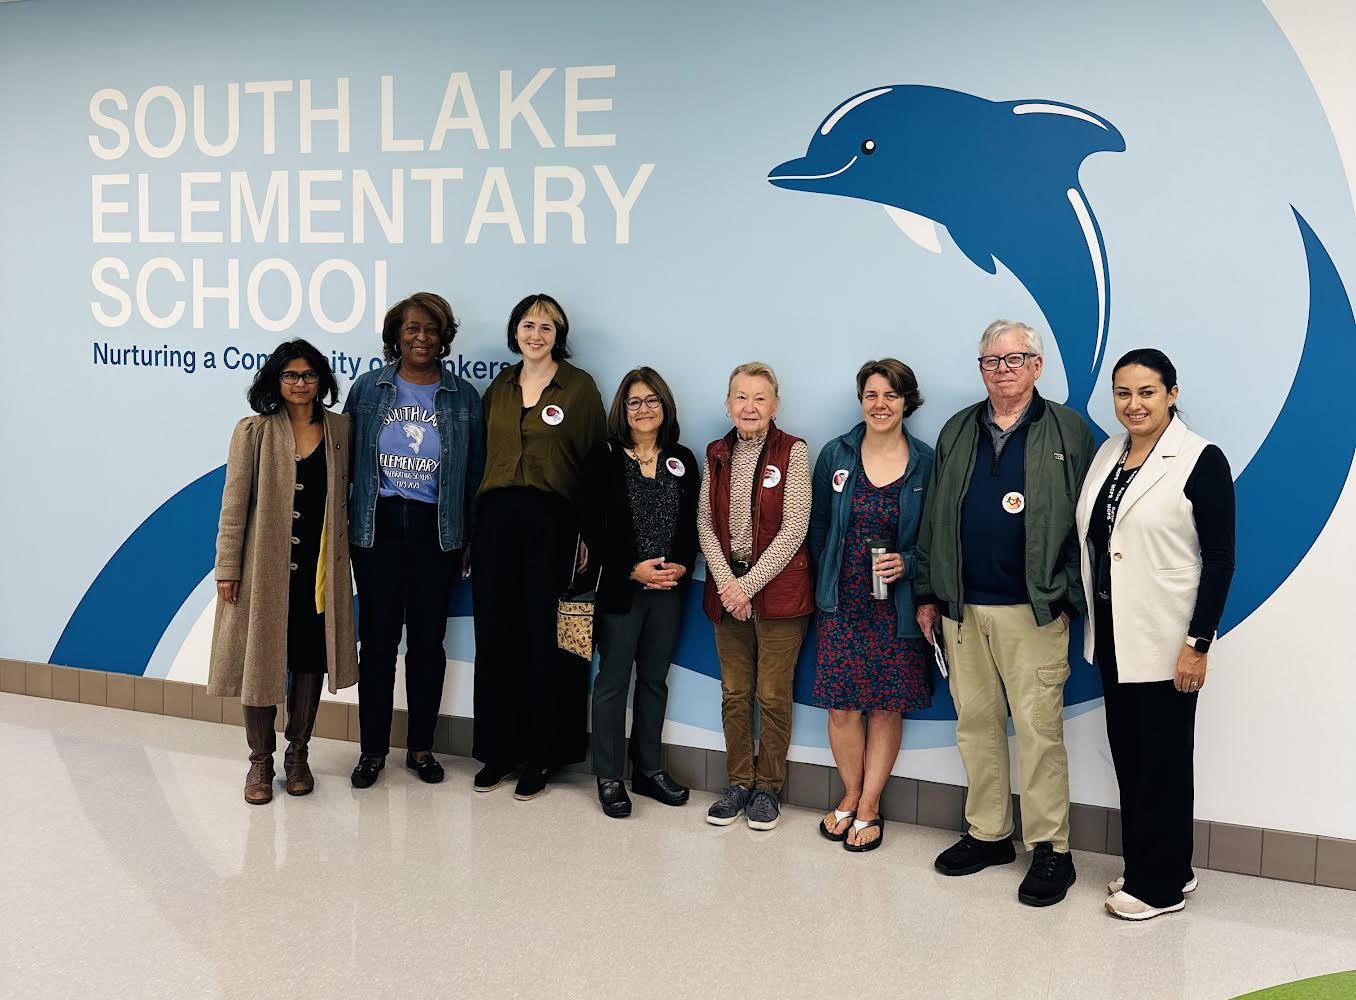 Temple Beth Ami members Debbie Jacobs and Susan Stern with members from AIM (Action in Montgomery) and Asbury Village getting ready for a tour of the newly completed South Lake school. All three groups worked together to advocate for the school's needed replacement.